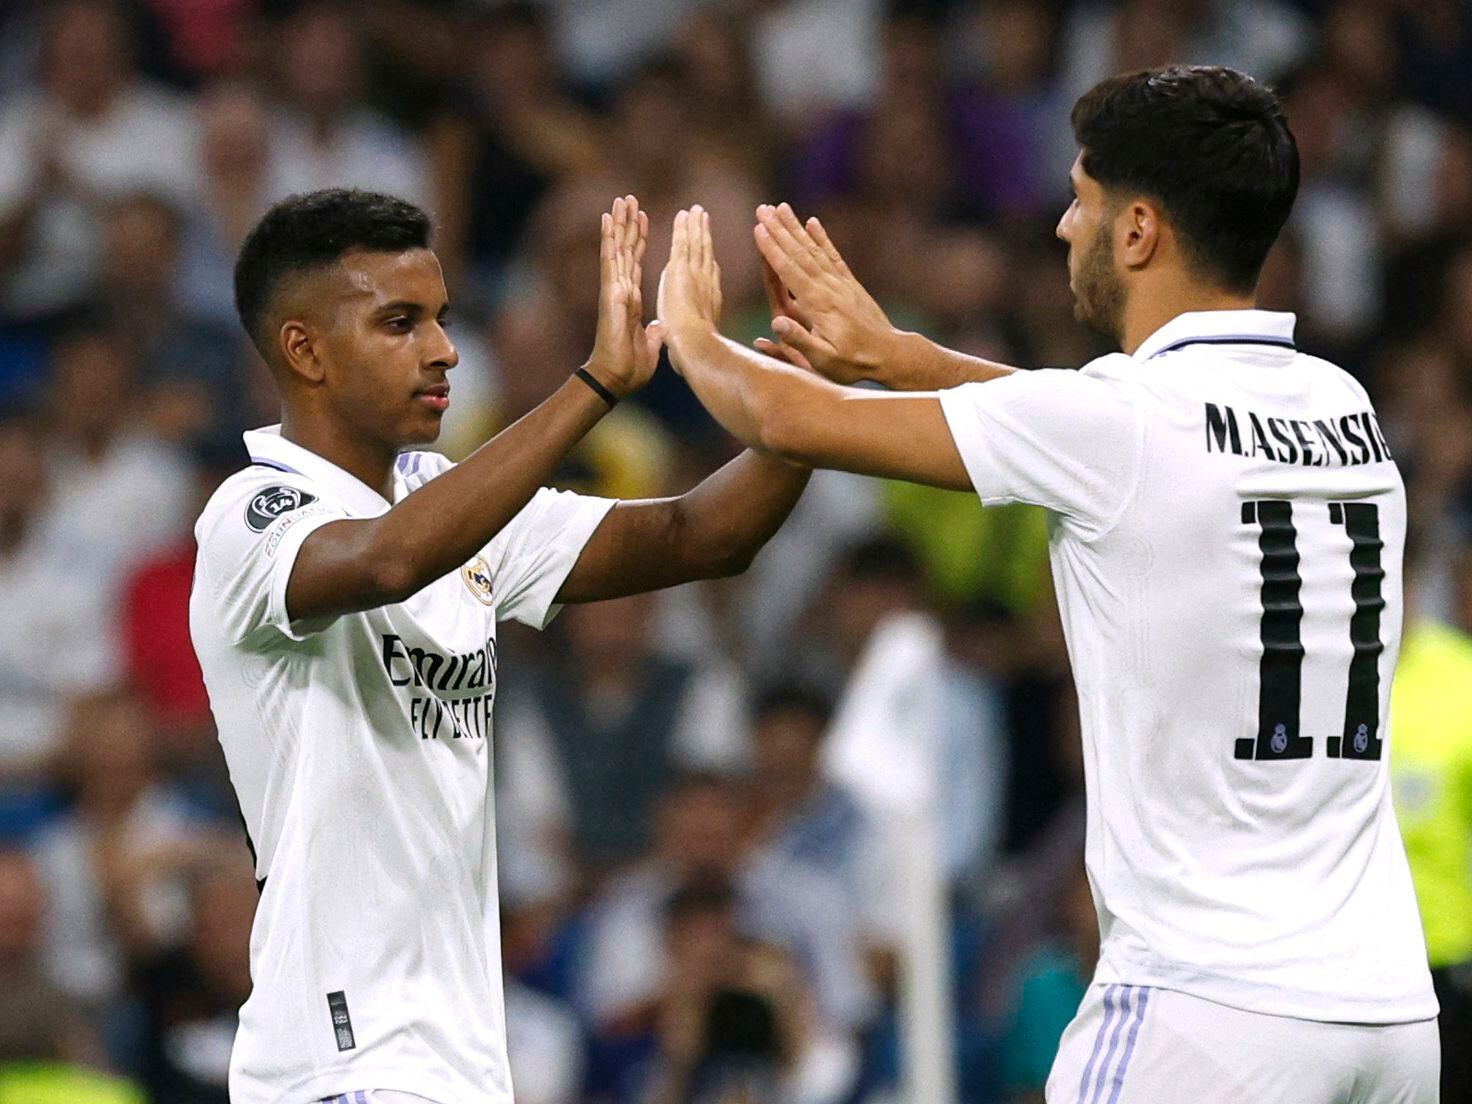 UEFA Champions League 2022-23: Real Madrid Beat Shakhtar Donetsk To Take  Full Control Of Group F